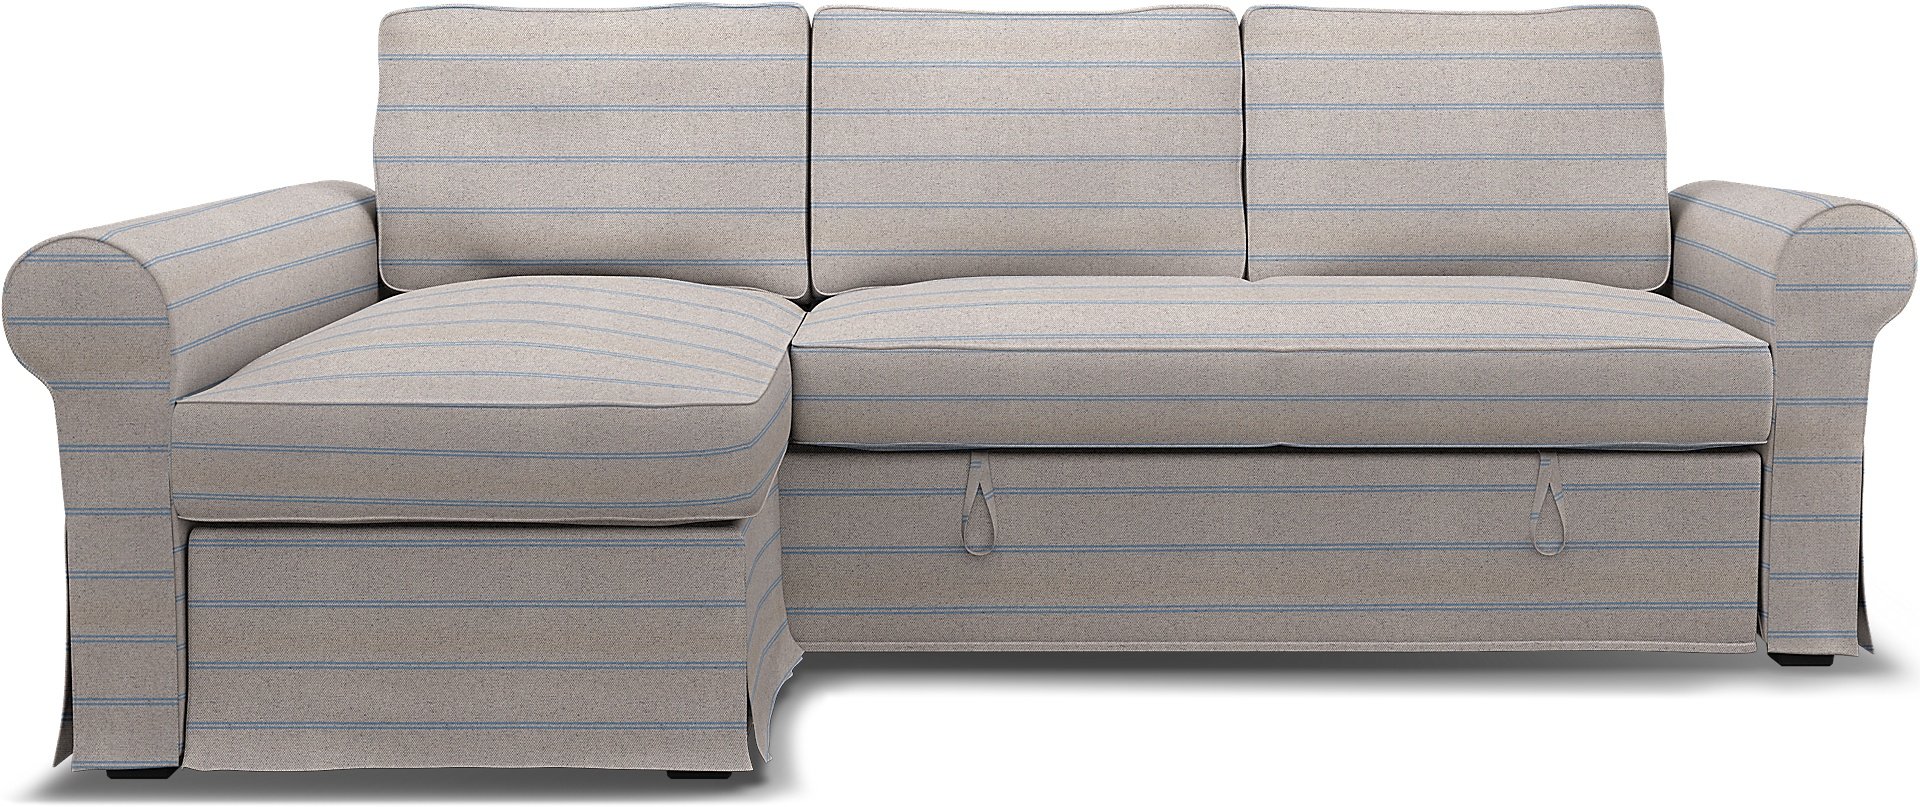 IKEA - Backabro Sofabed with Chaise Cover, Blue Stripe, Cotton - Bemz